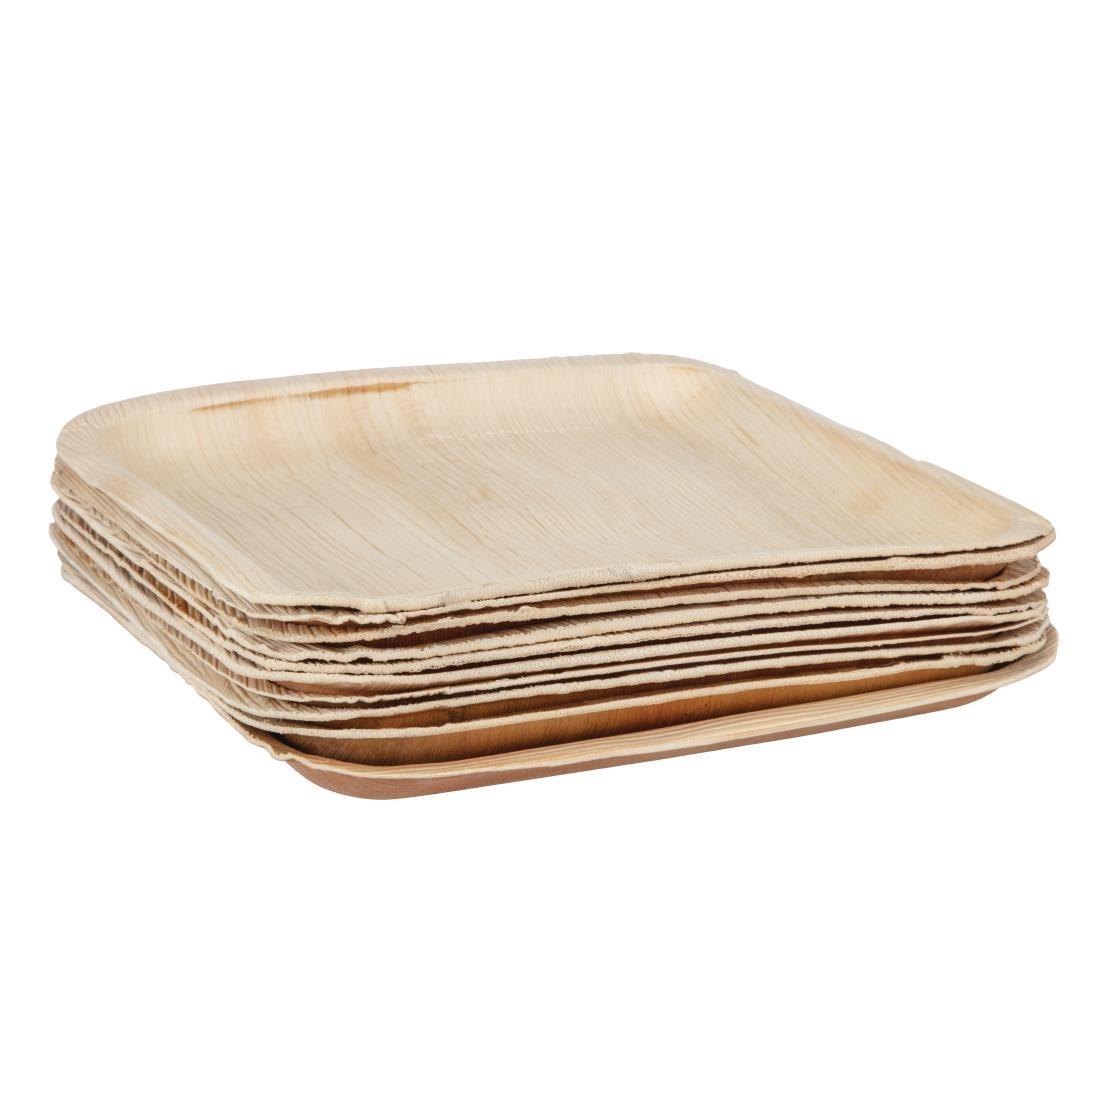 Fiesta Compostable Palm Leaf Plates Square 250mm (Pack of 100) - DK381  - 3